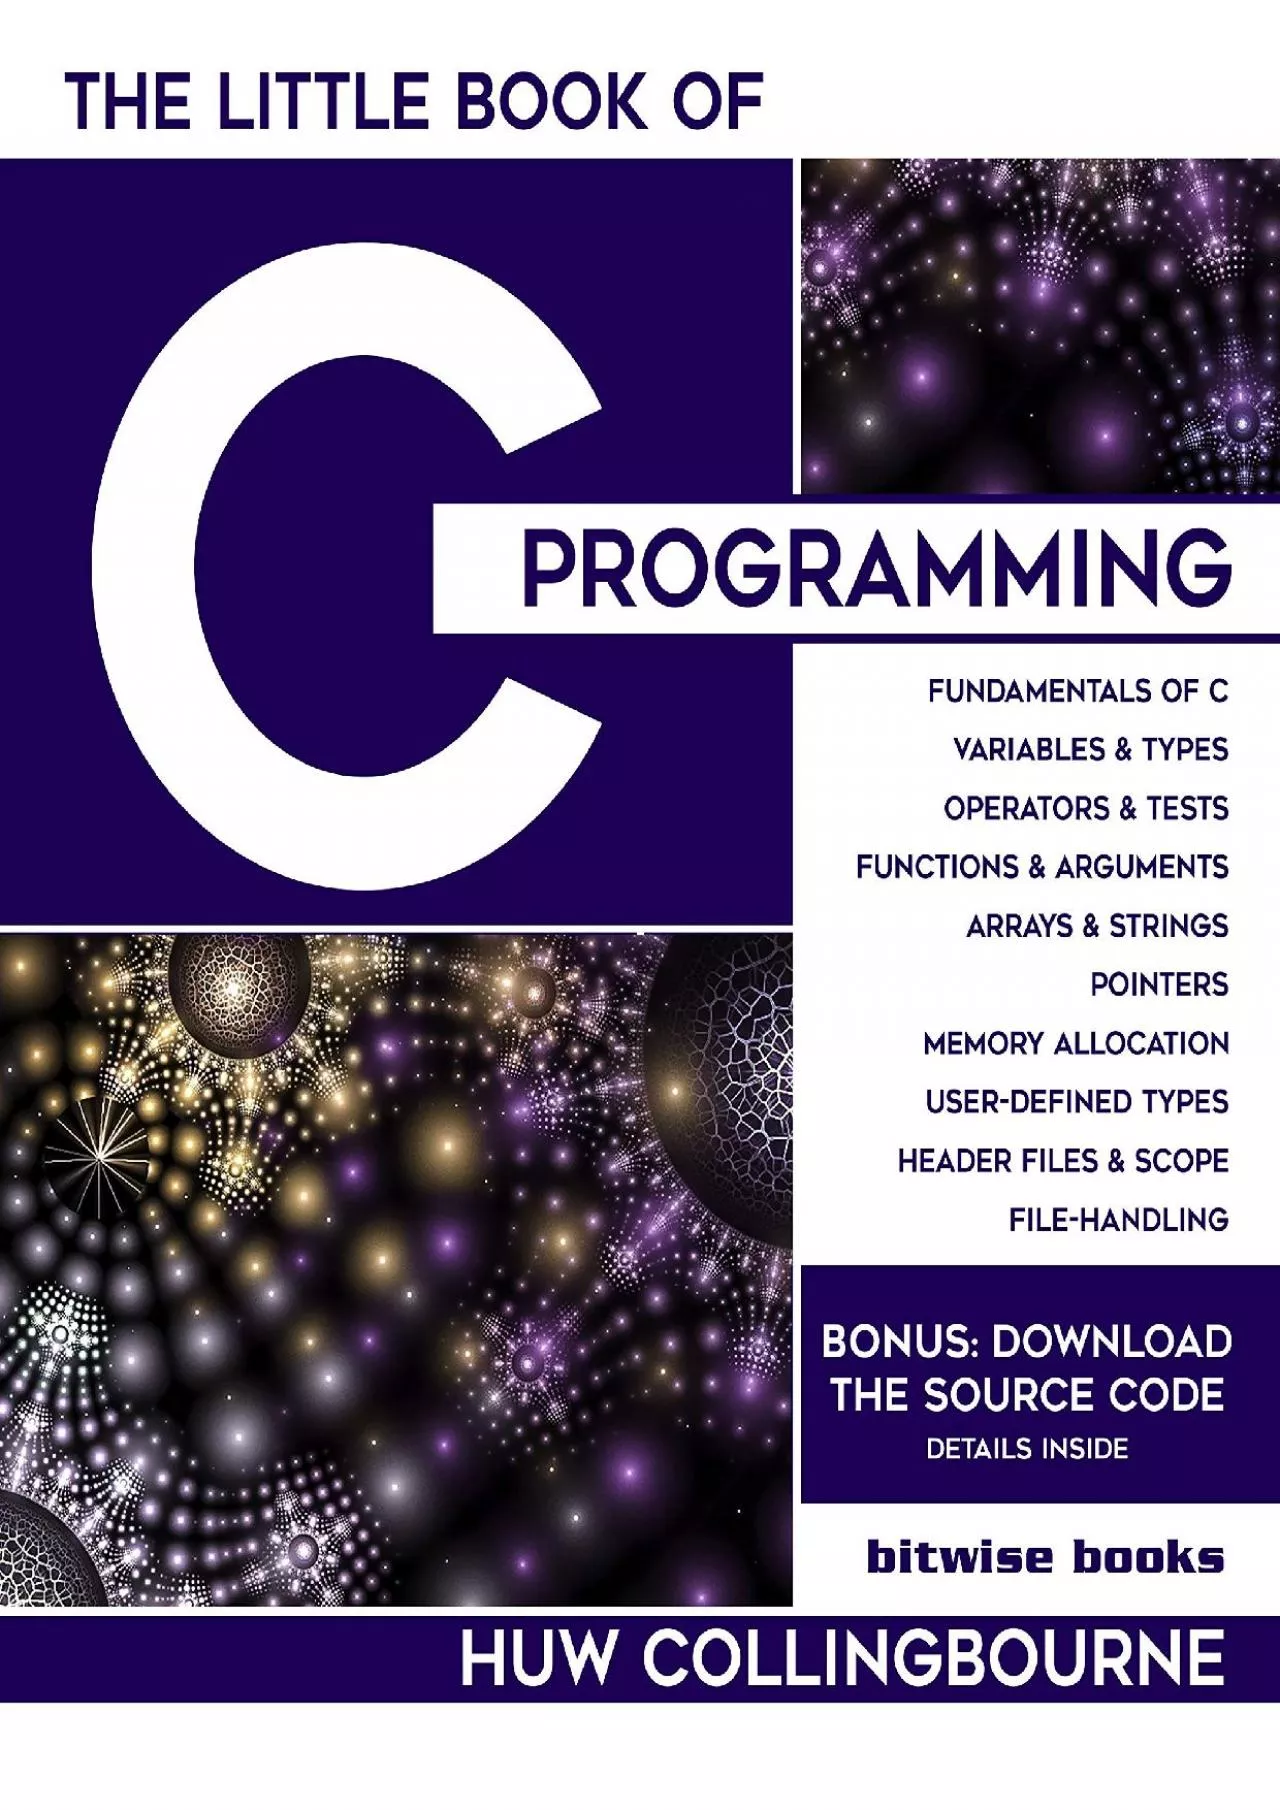 [BEST]-The Little Book Of C Programming: C Programming For Beginners (Little Programming